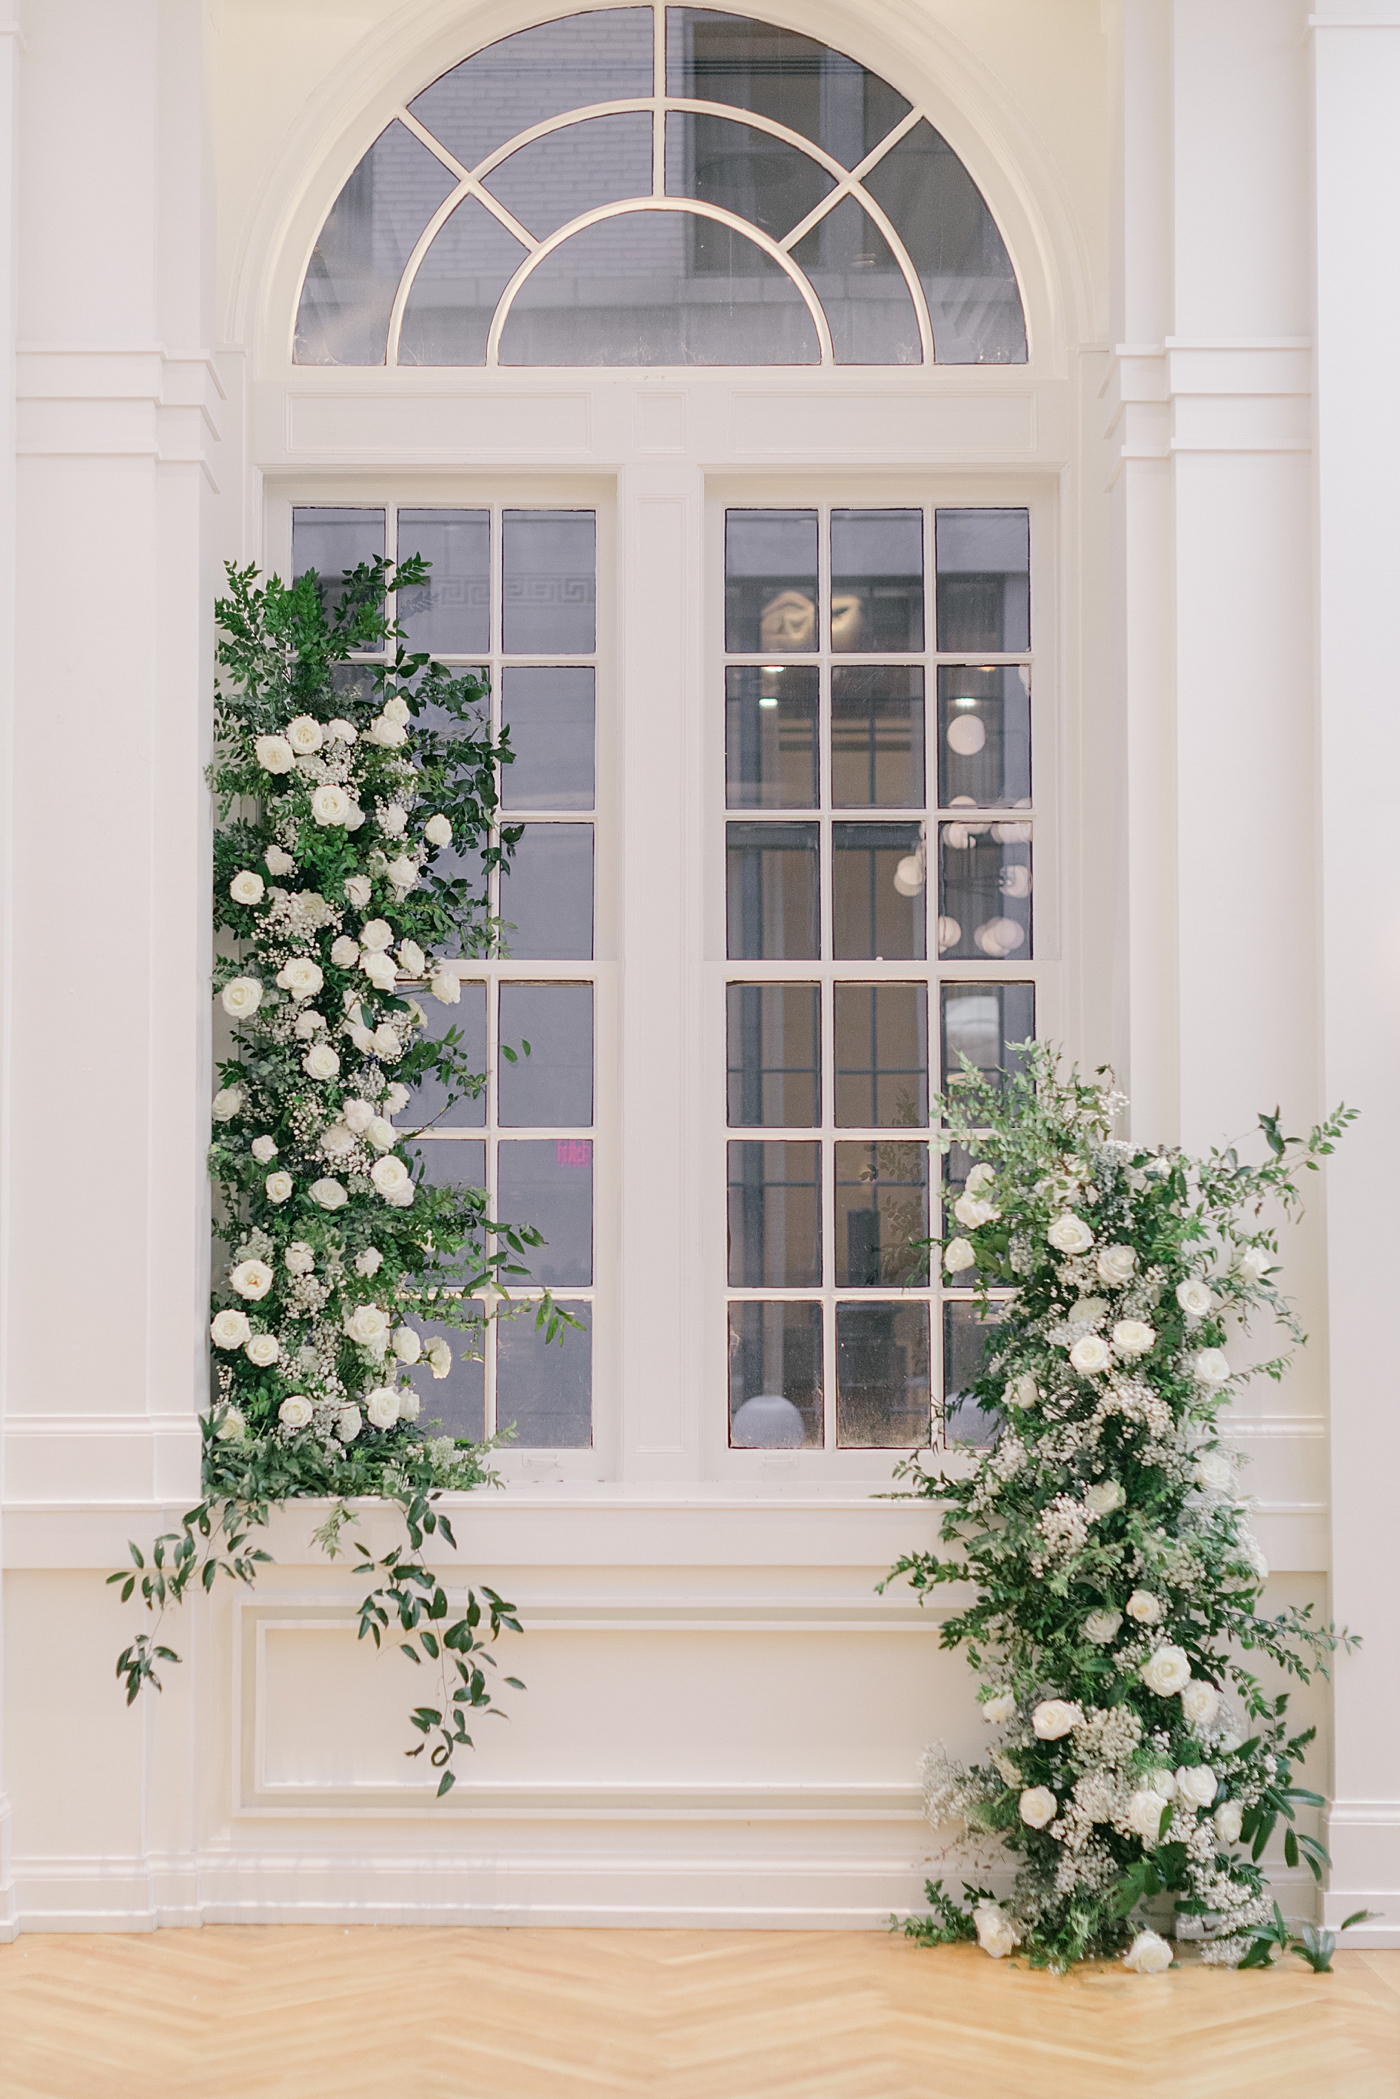 Bridal installation with white flowers during Noelle, Nashville Wedding | Photo by Hope Helmuth Photography